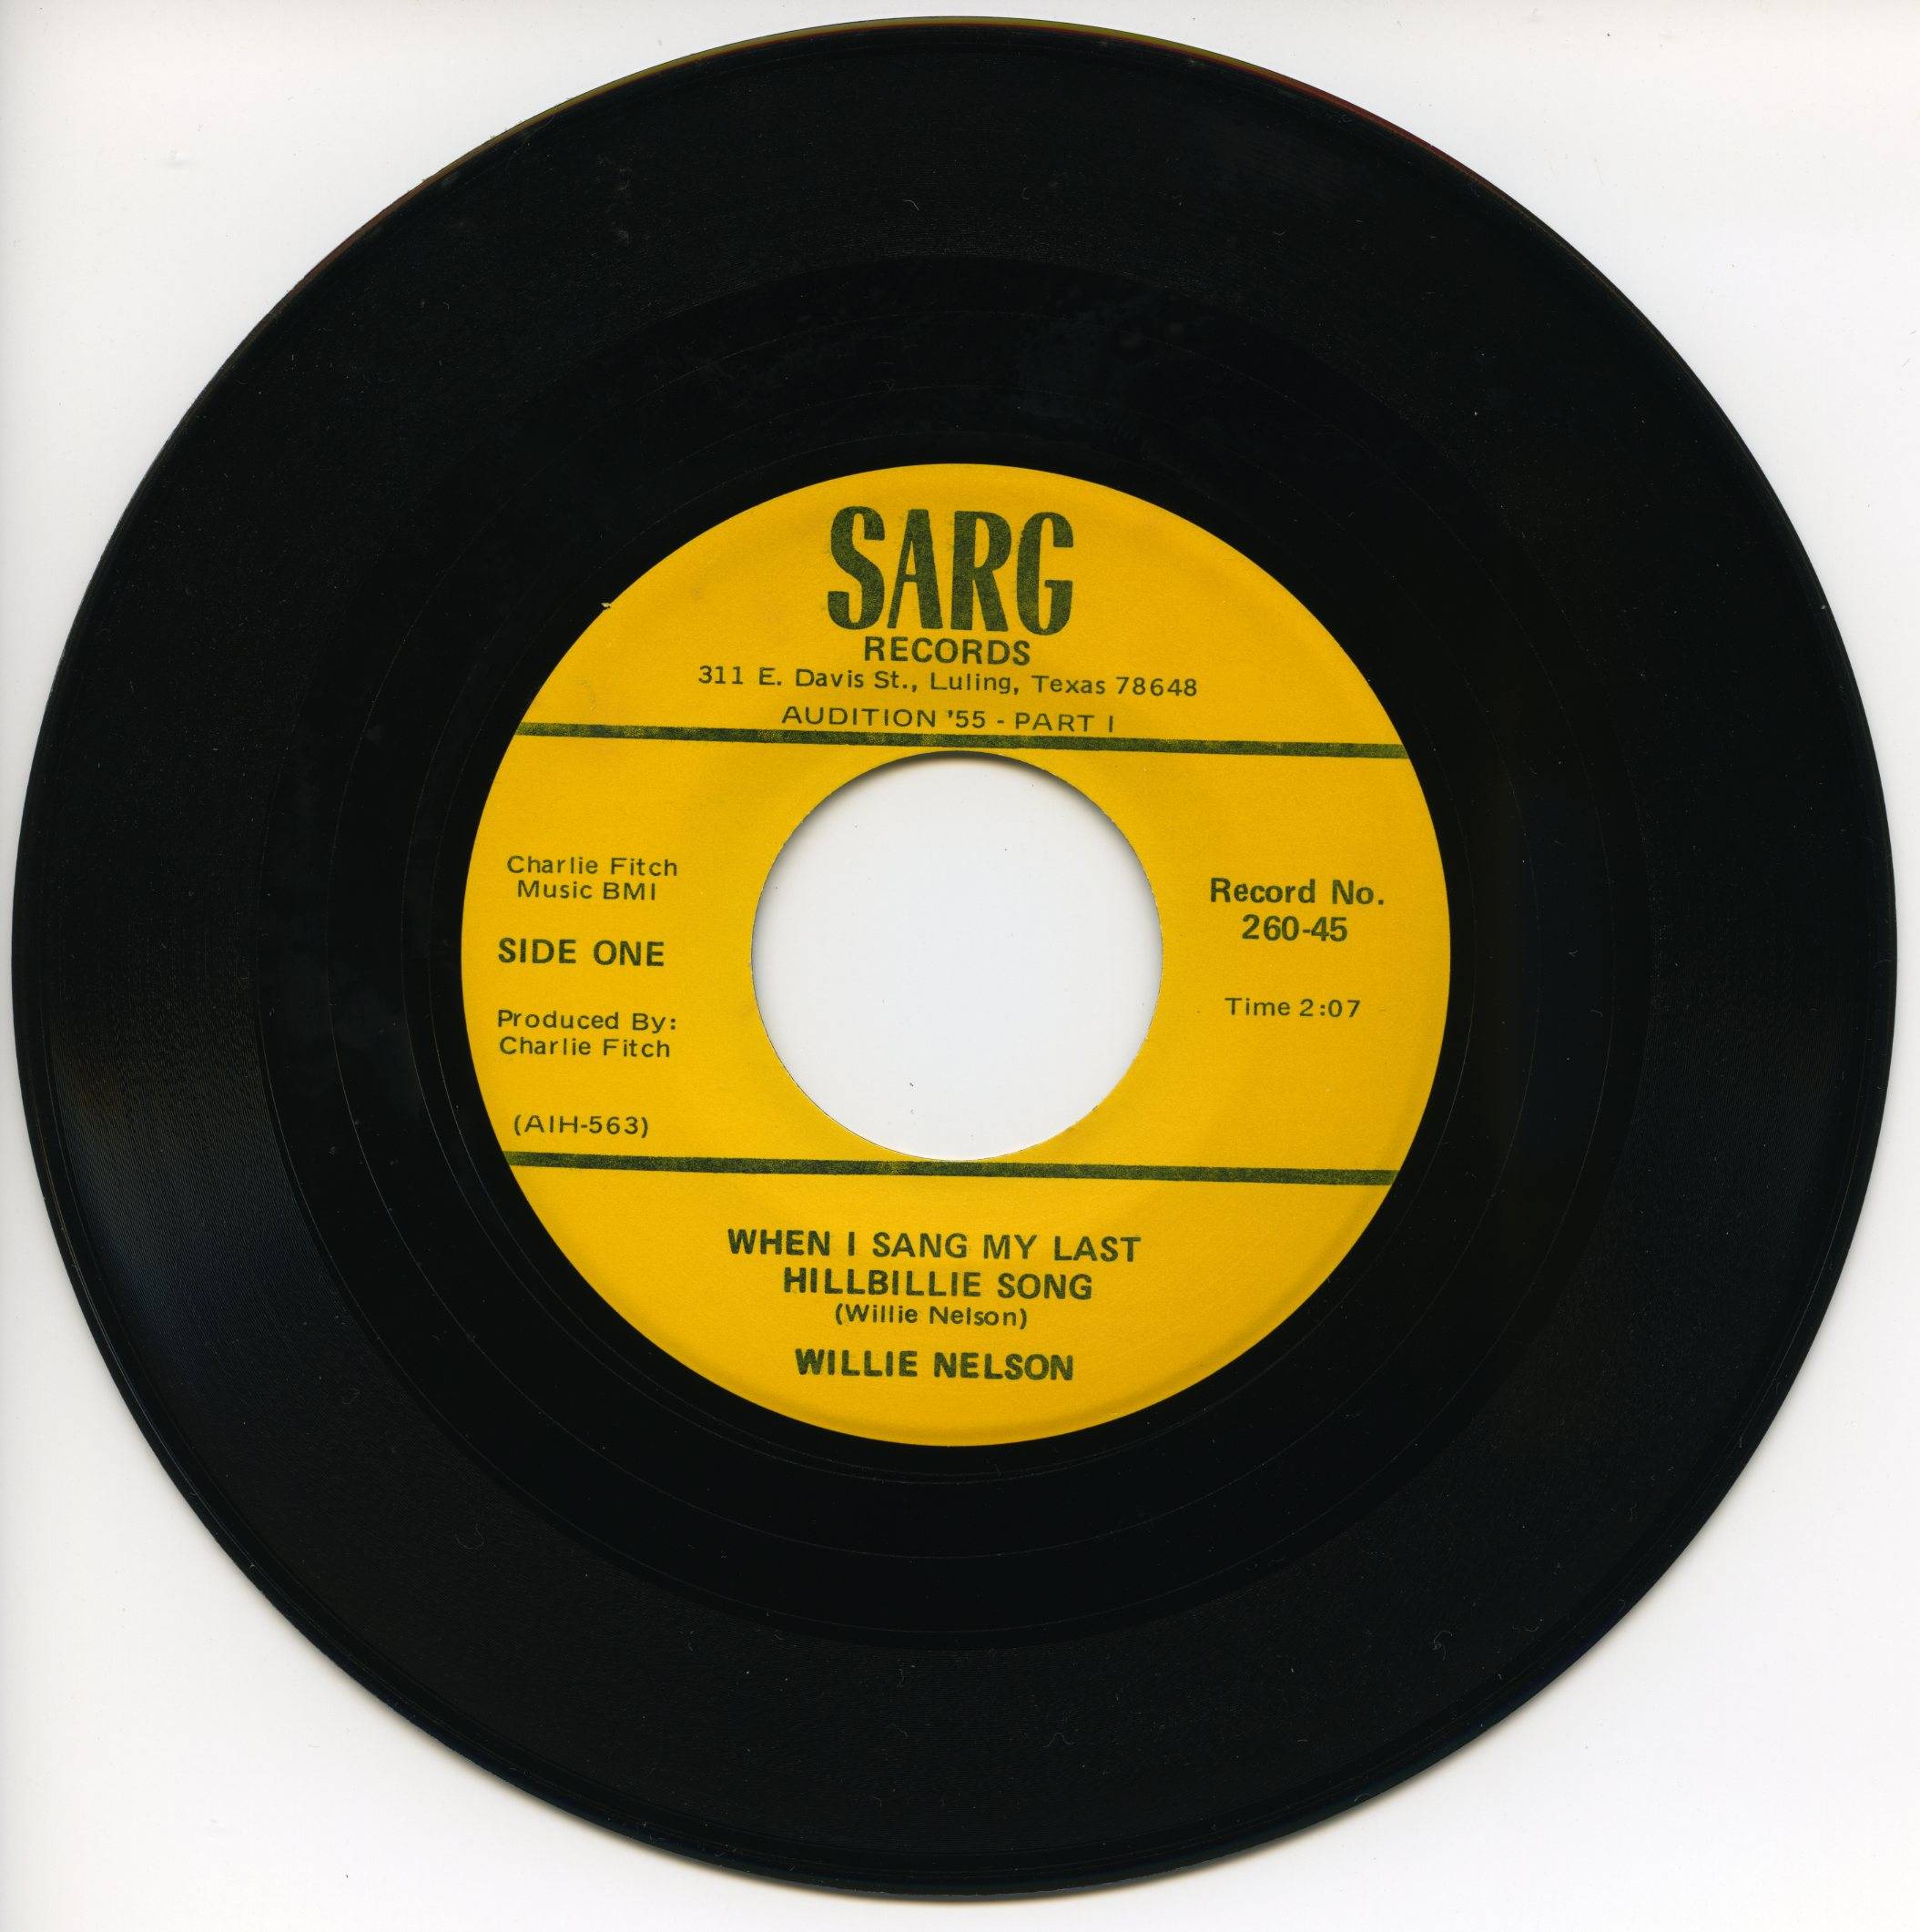 "When I Sang My Last Hillbillie Song," 1955 demo for Sarg Records by Willie Nelson